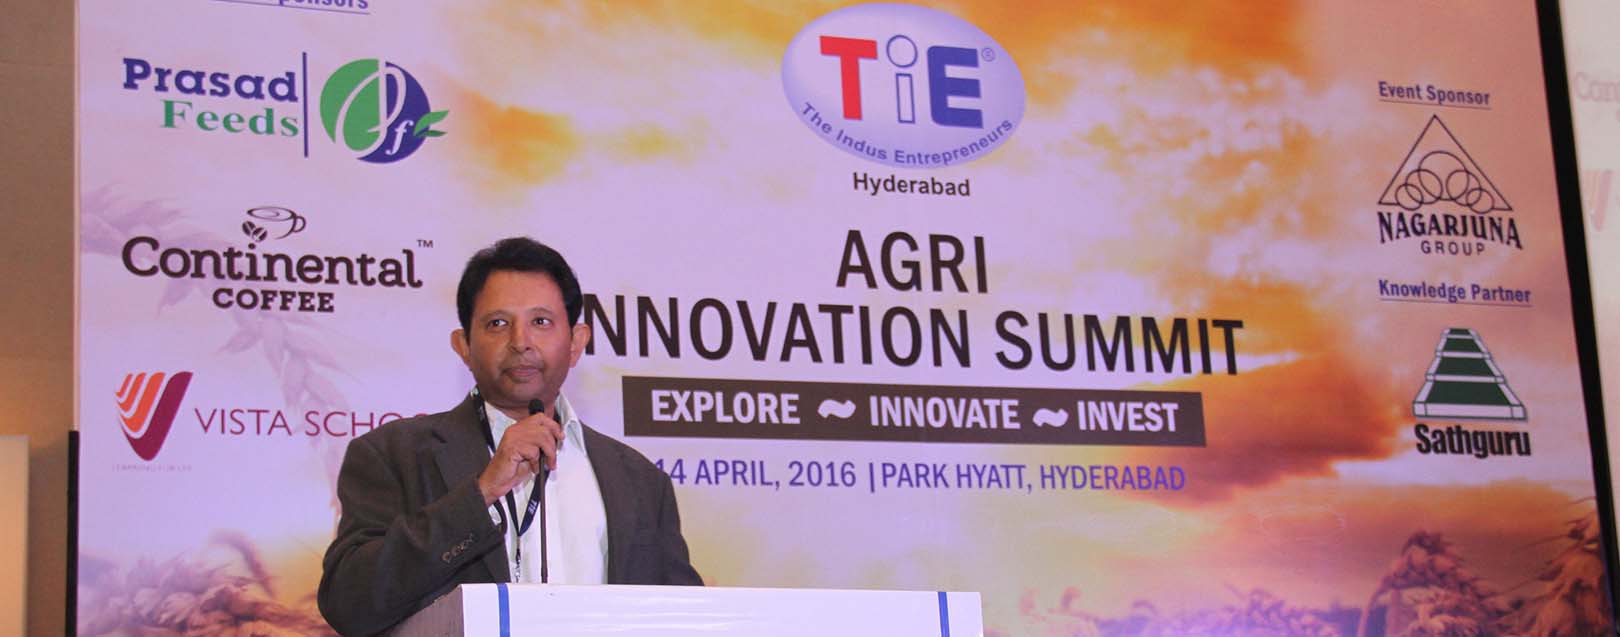 Adopting new technologies can improve agri exports